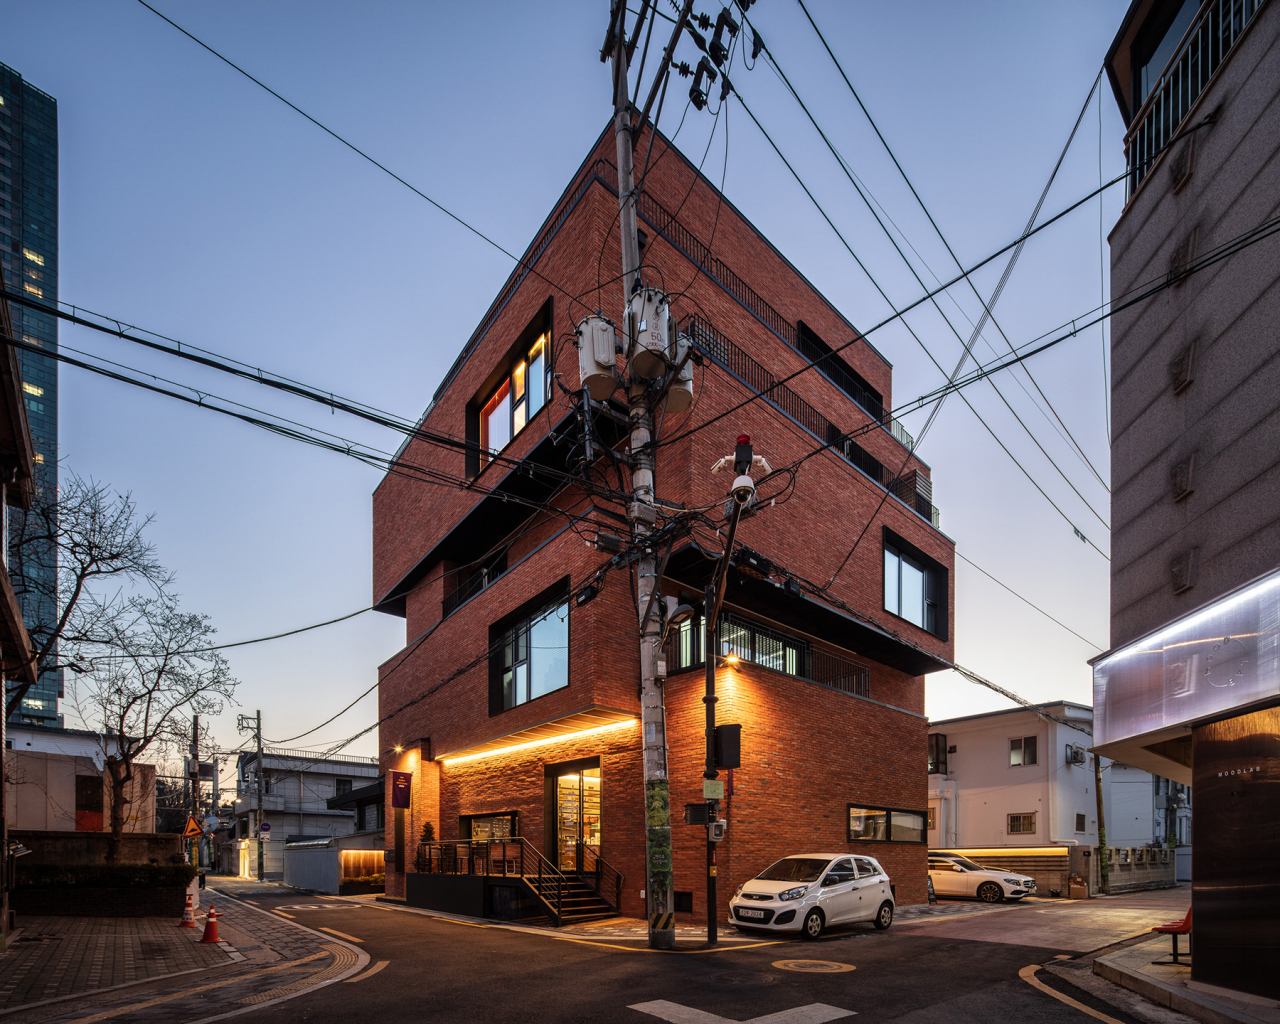 A red brick building along Seoulsup-gil represents the unique character of existing architecture in the area, located in Seongdong-gu, eastern Seoul. (Seongdong-gu Office)